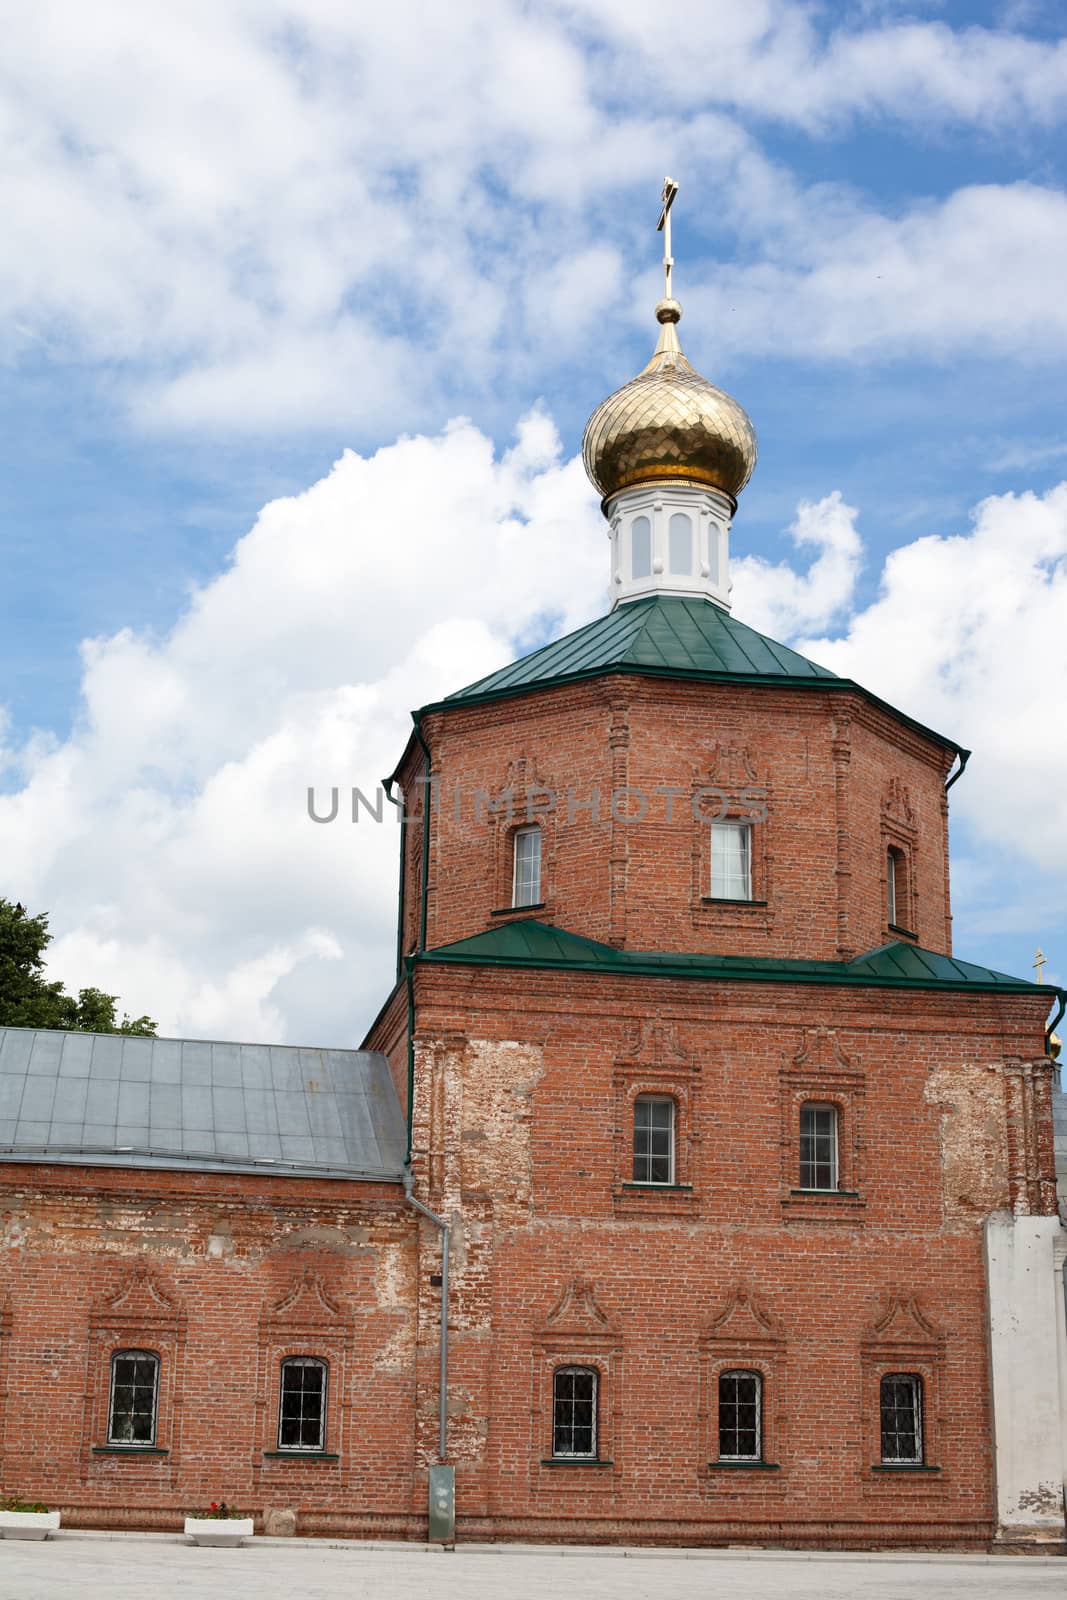 Brick red orthodox church with one golden dome
